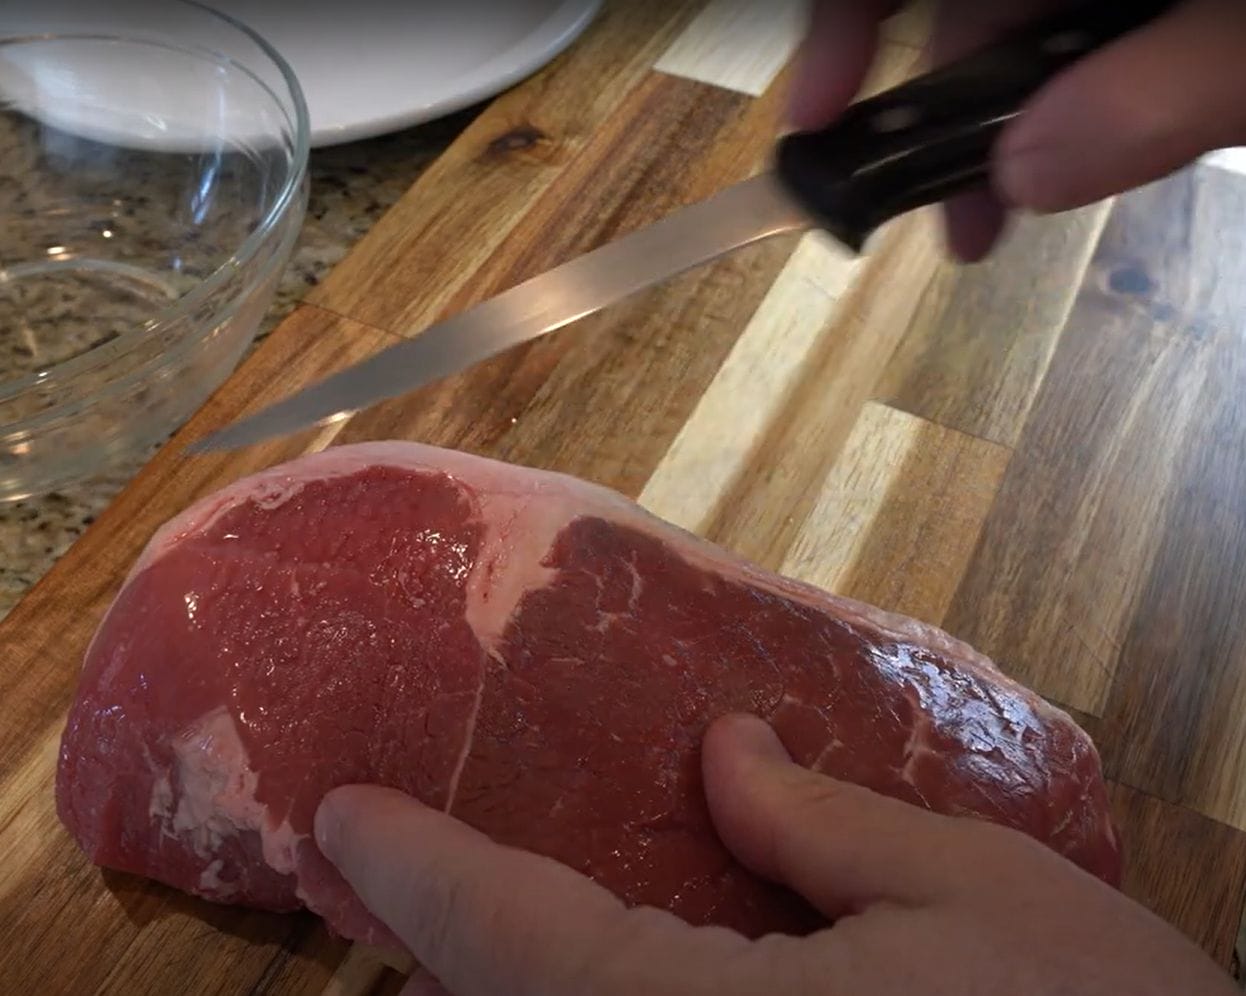 Trimming the fat off meat